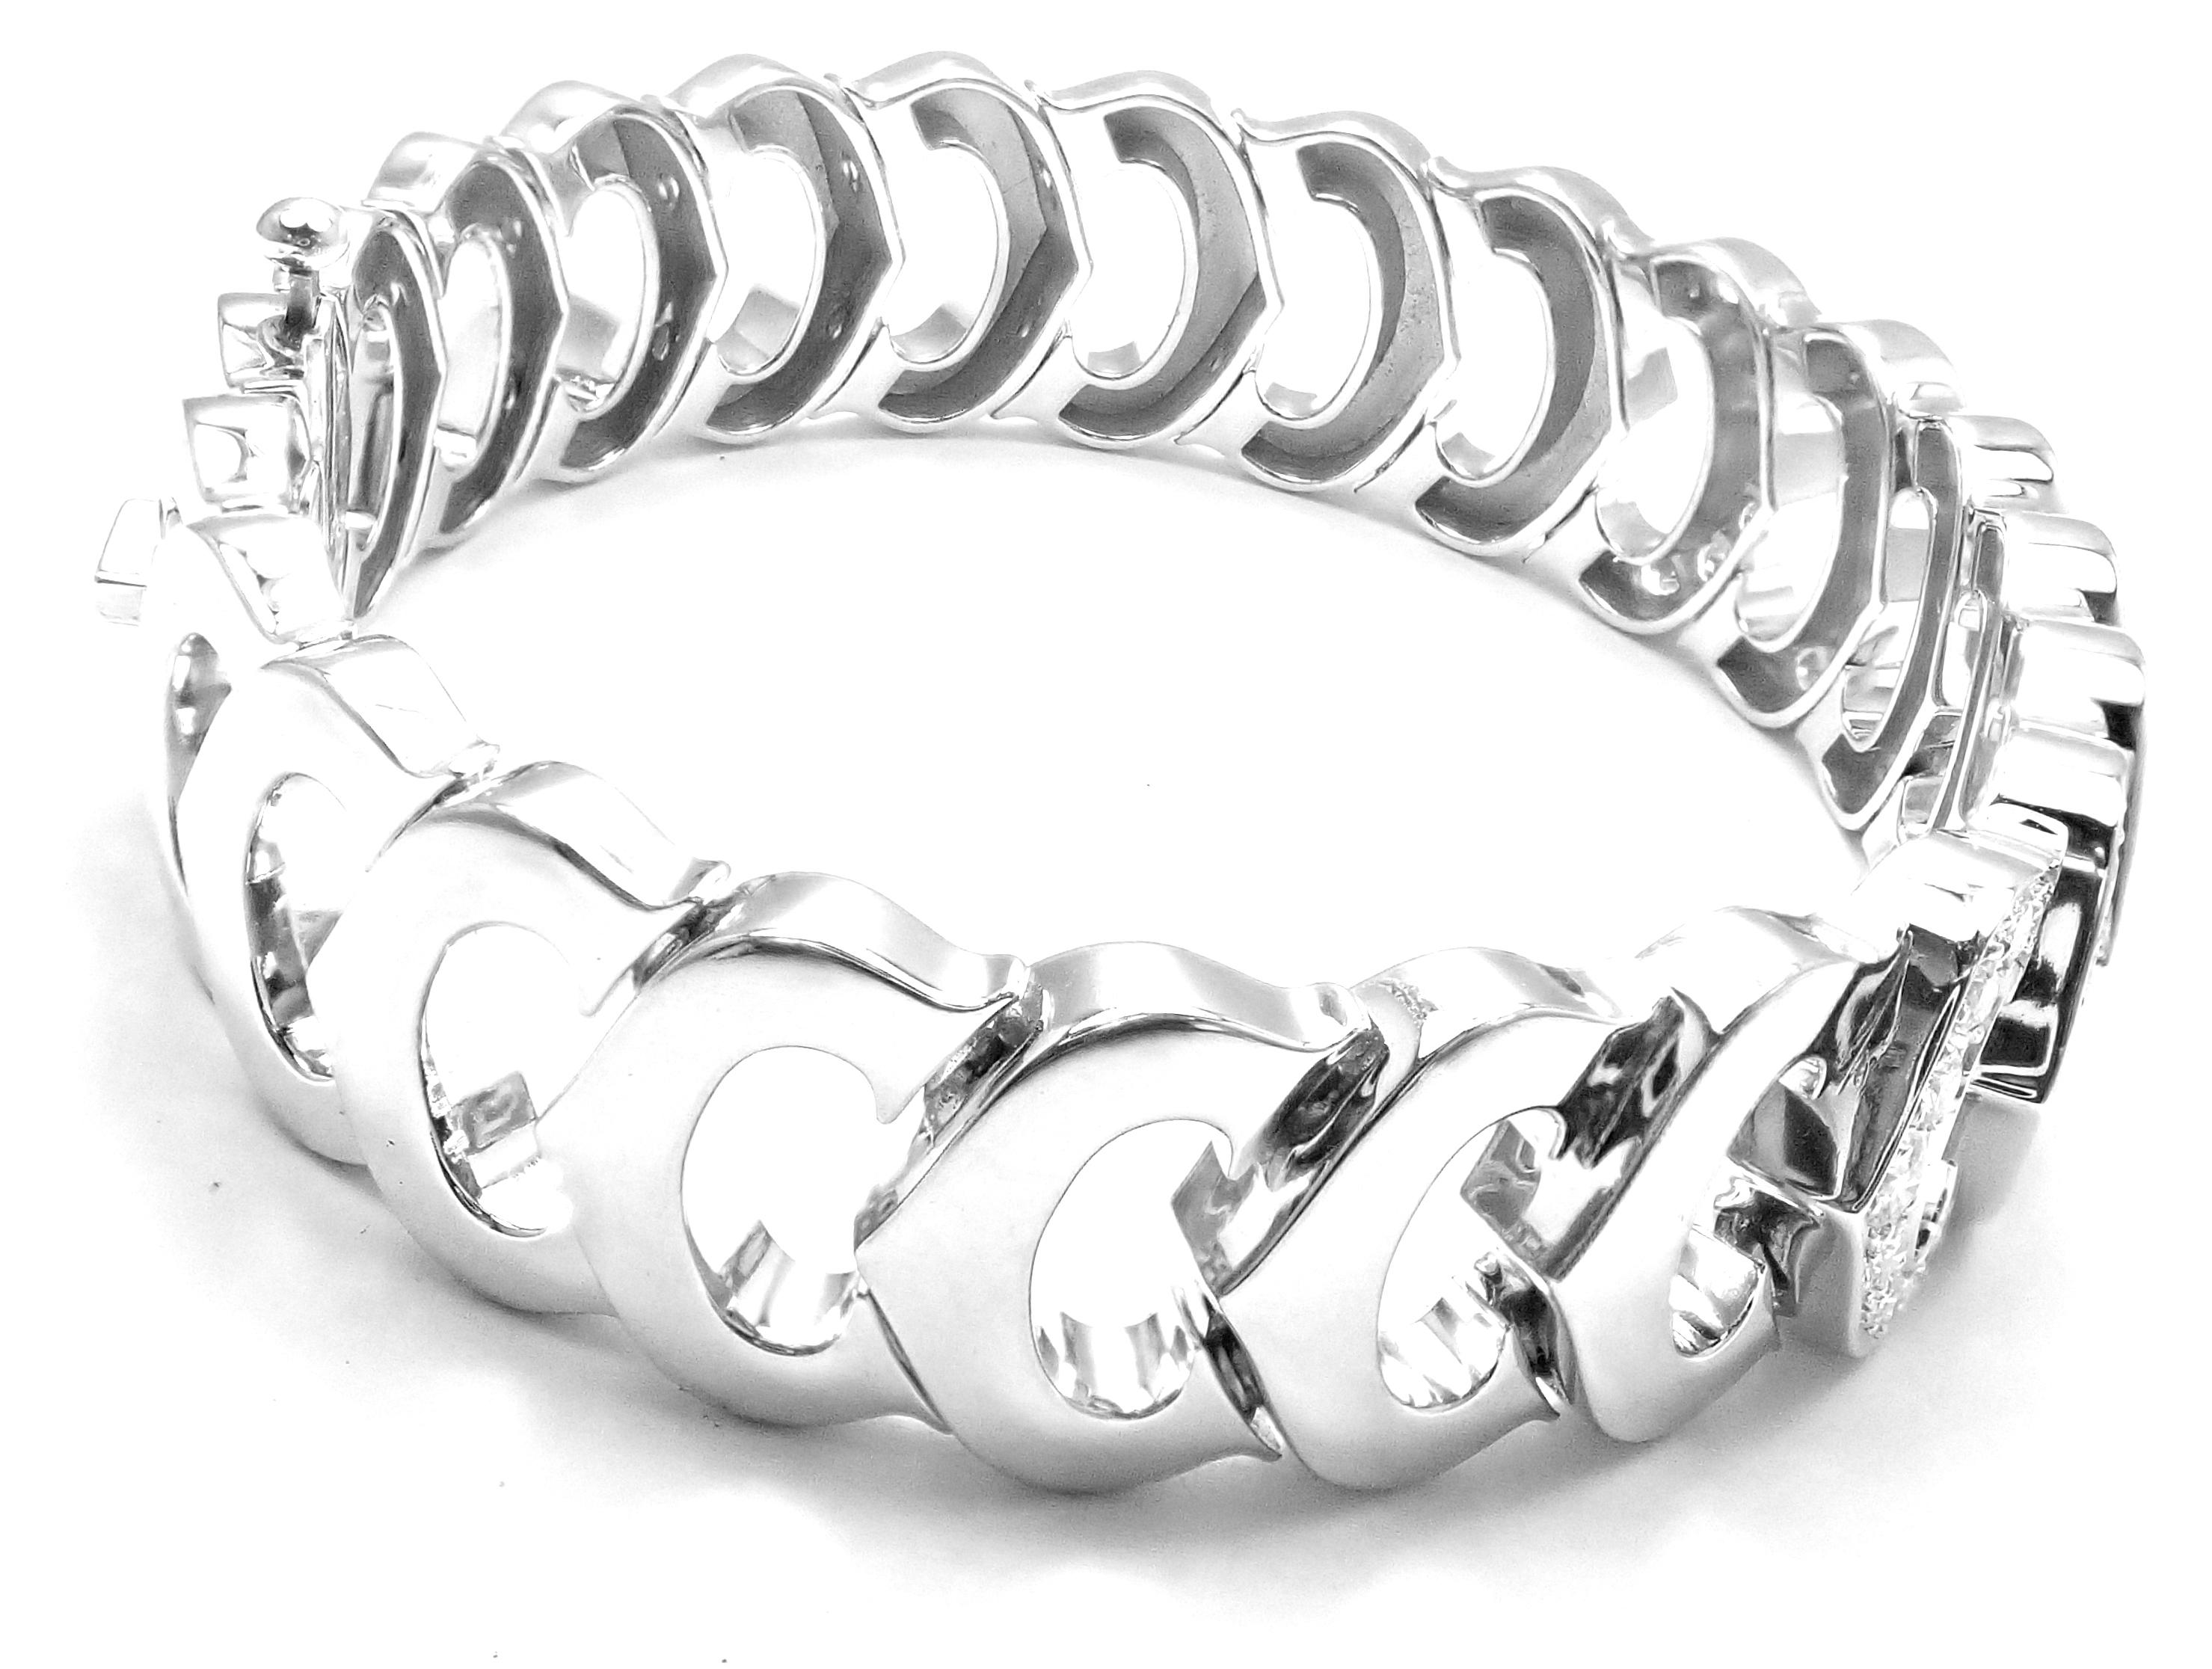 18k White Gold C De Cartier Double C Diamond Link Bracelet by Cartier. 
With 463 round brilliant cut diamonds G color, VS1 clarity total weight approx. 2ct
This bracelet comes with a Cartier box and service paper from Cartier store.
Details: